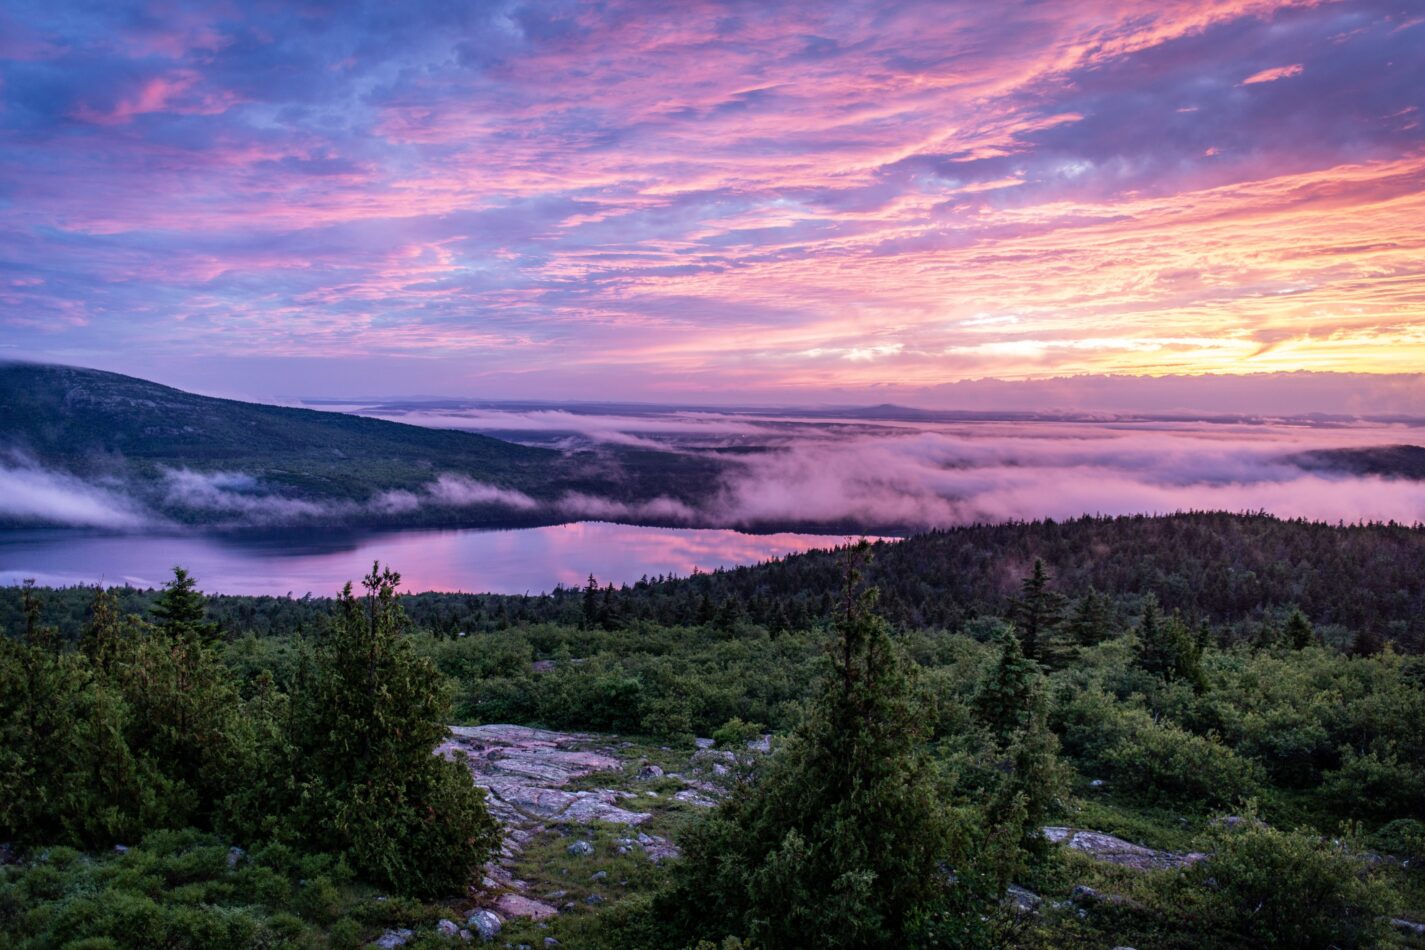 Acadia National Park in Maine.